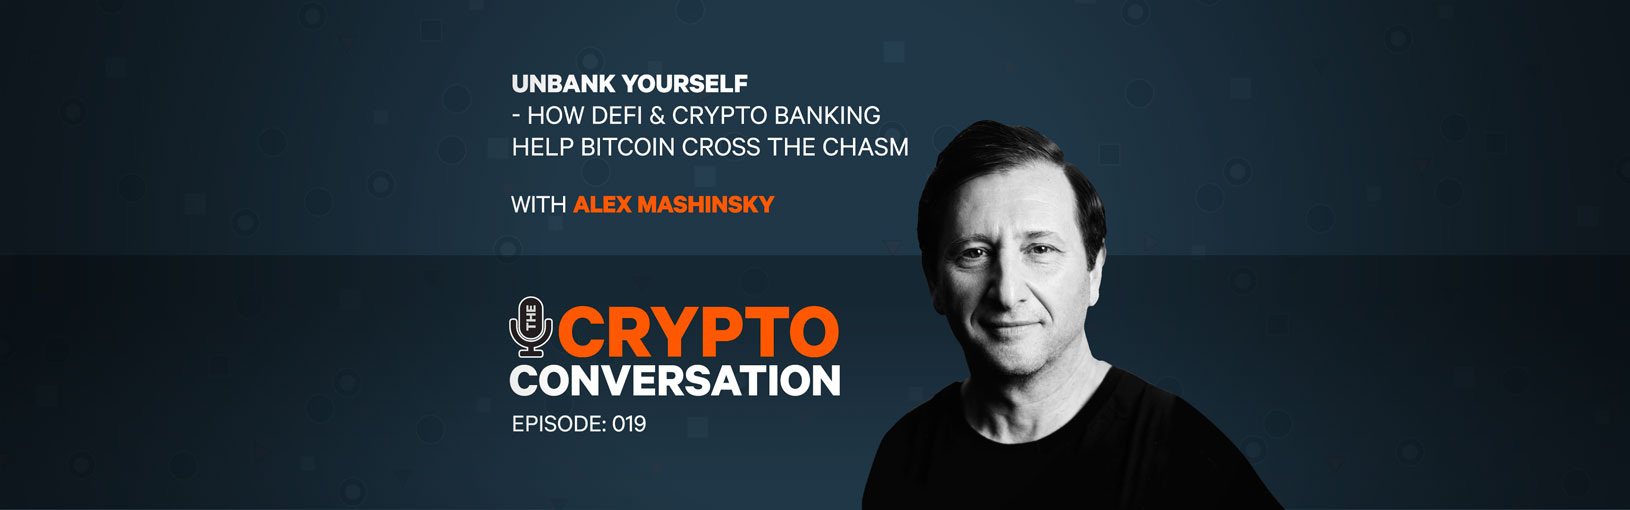 Unbank Yourself – How DeFi & Crypto Banking help Bitcoin cross the chasm